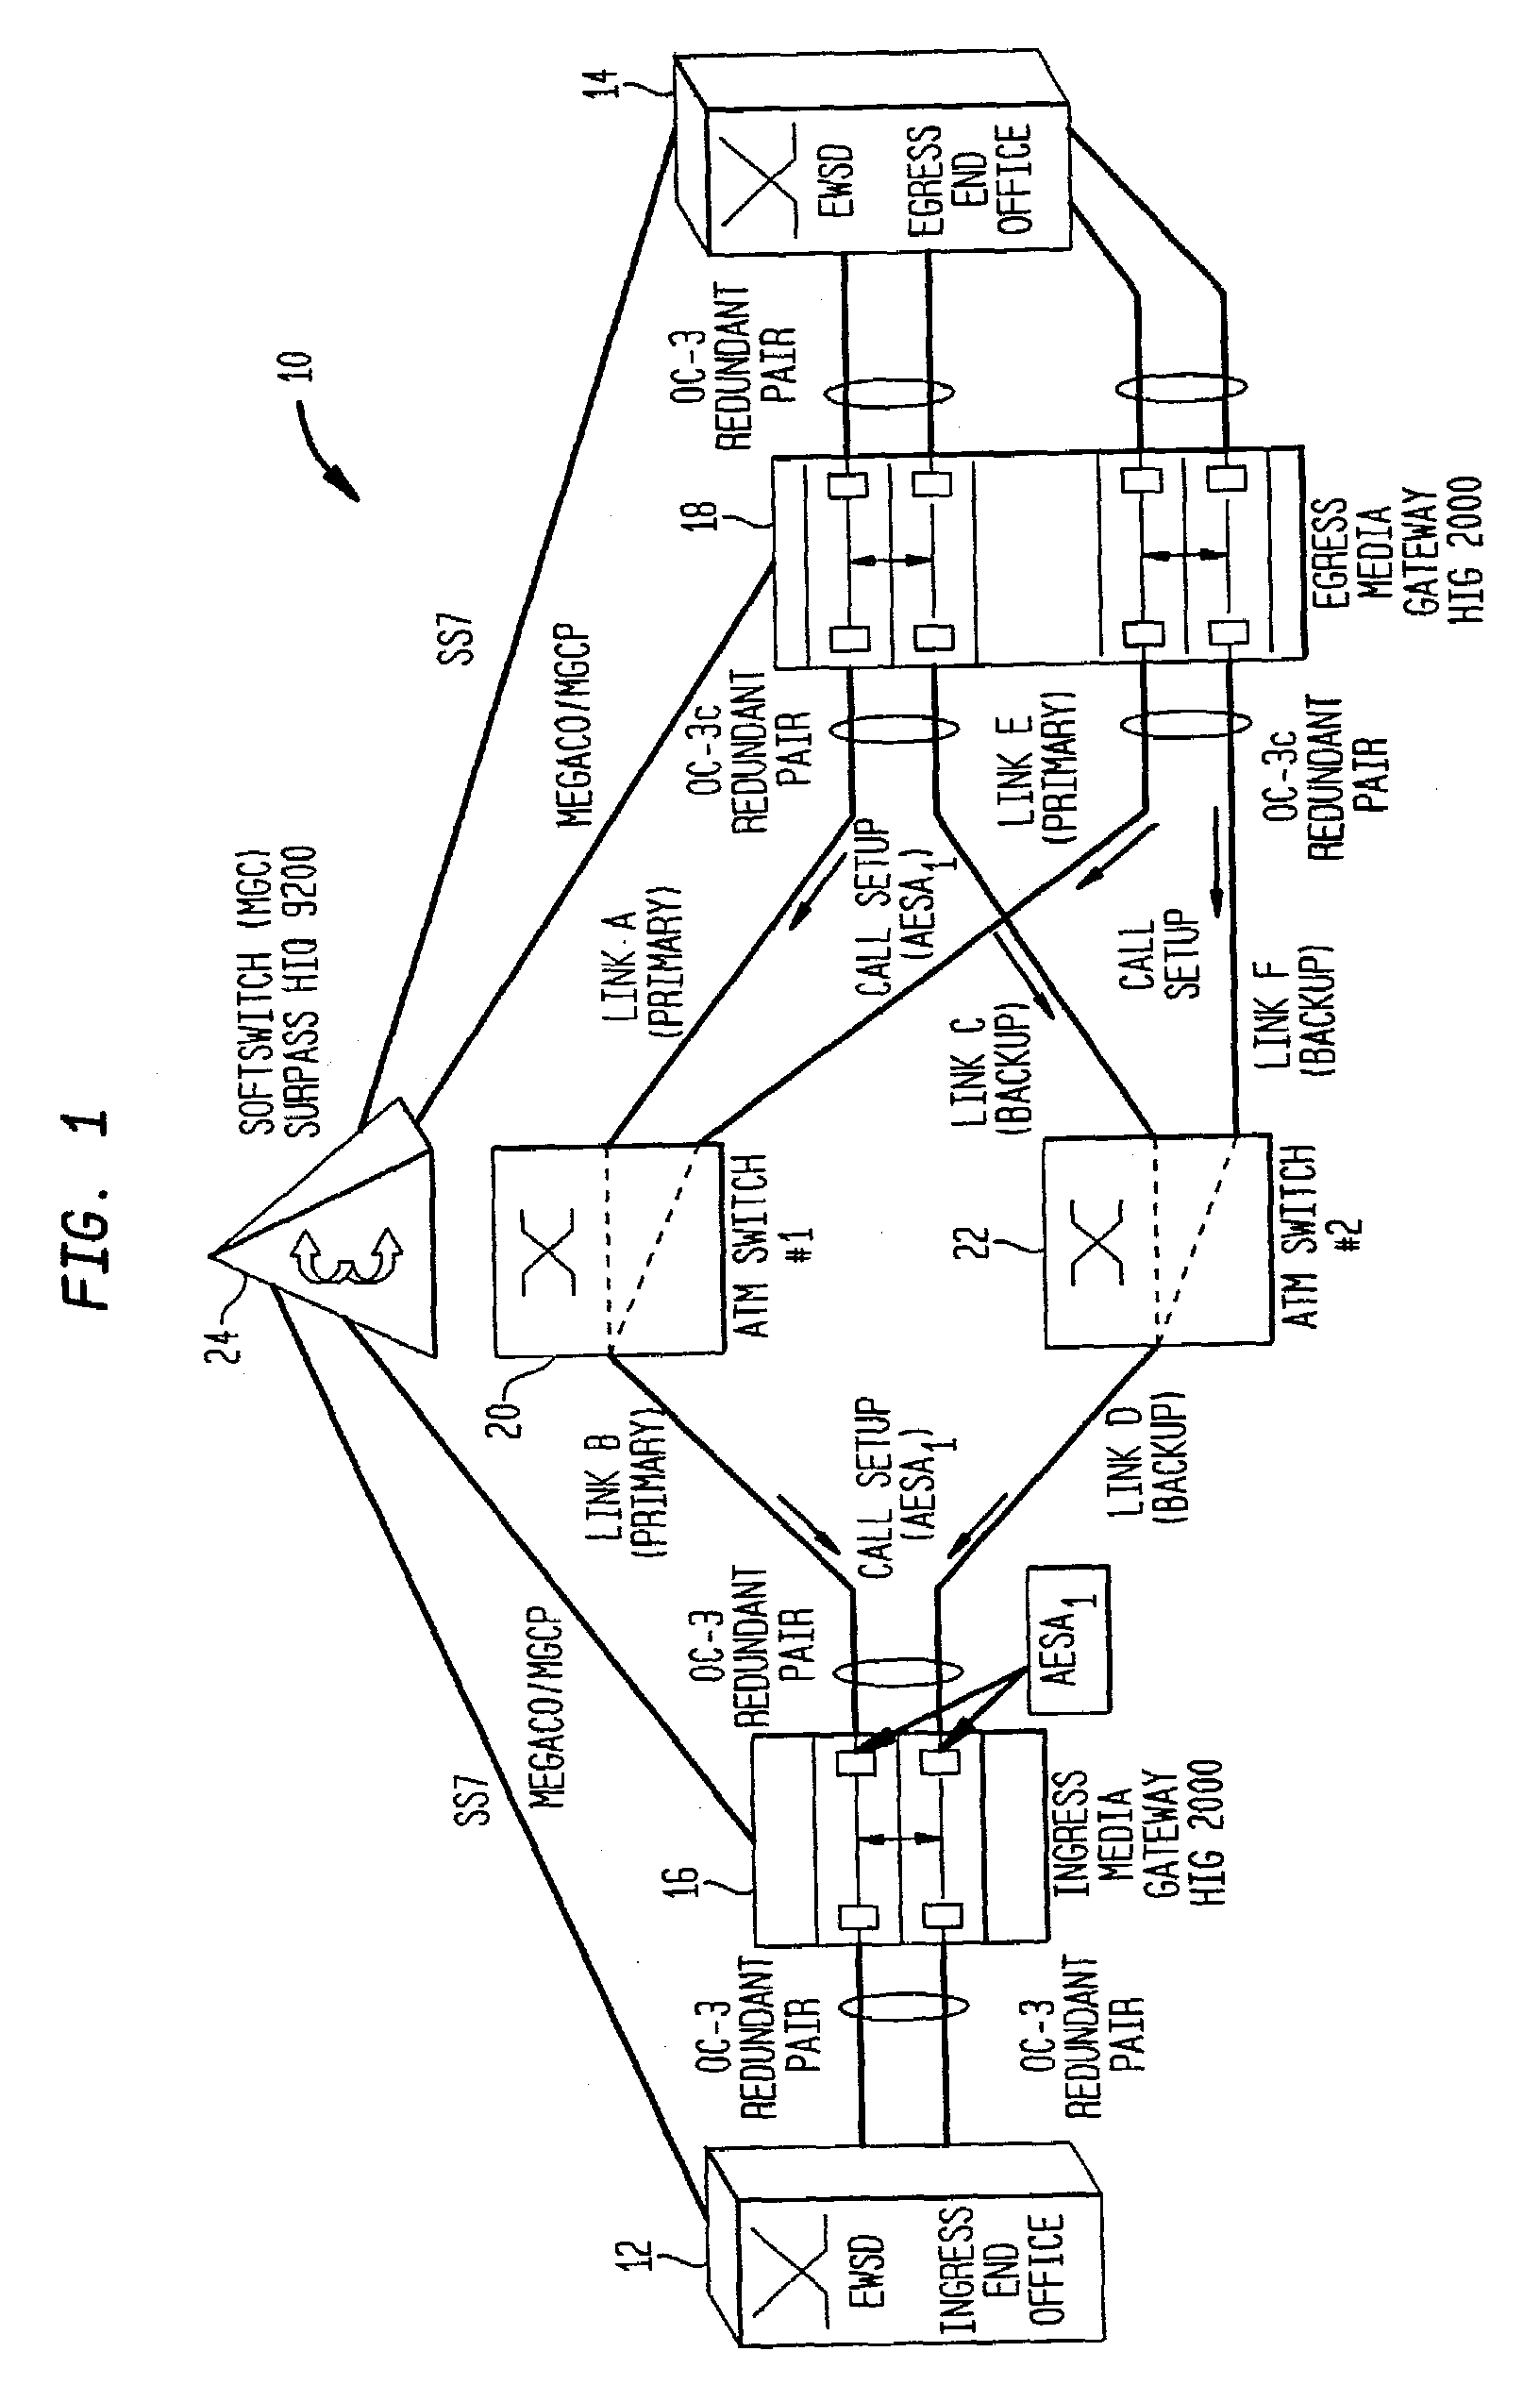 Method for resilient call setup through ATM networks for Softswitch applications